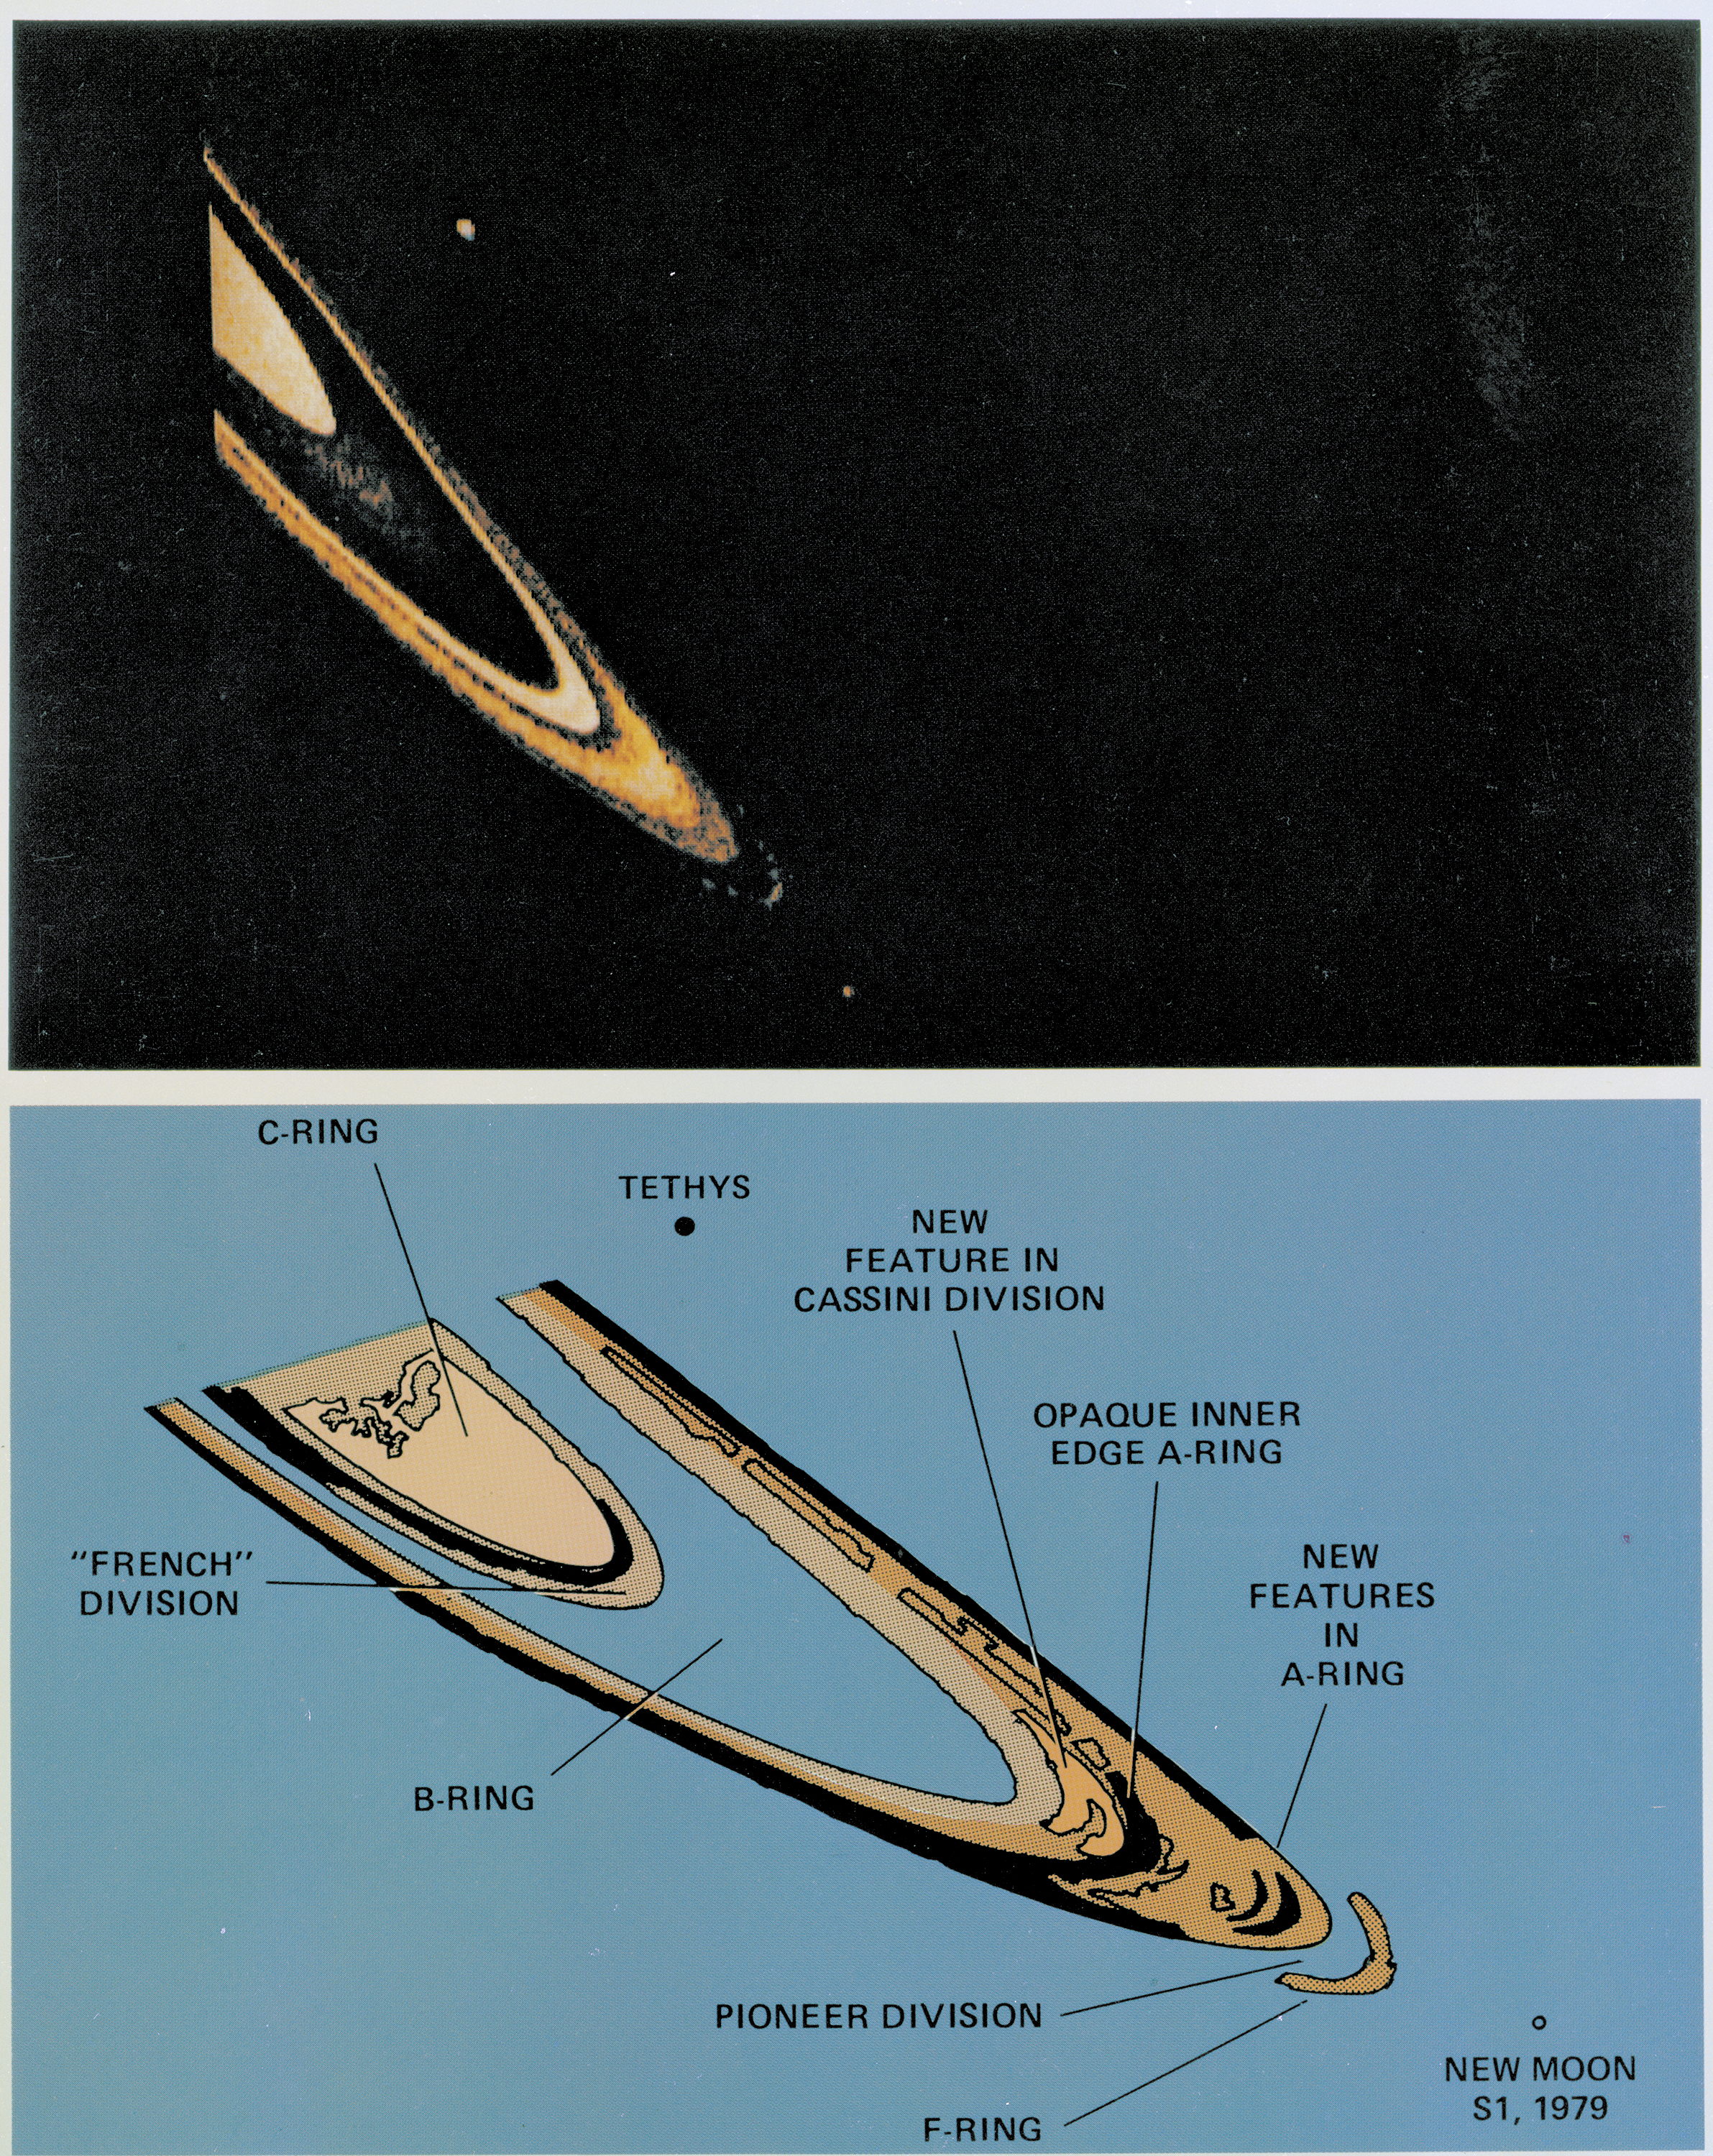 Image taken by Pioneer 11 spacecraft detailing location of Saturn's rings, including location of newly discovered F-ring.